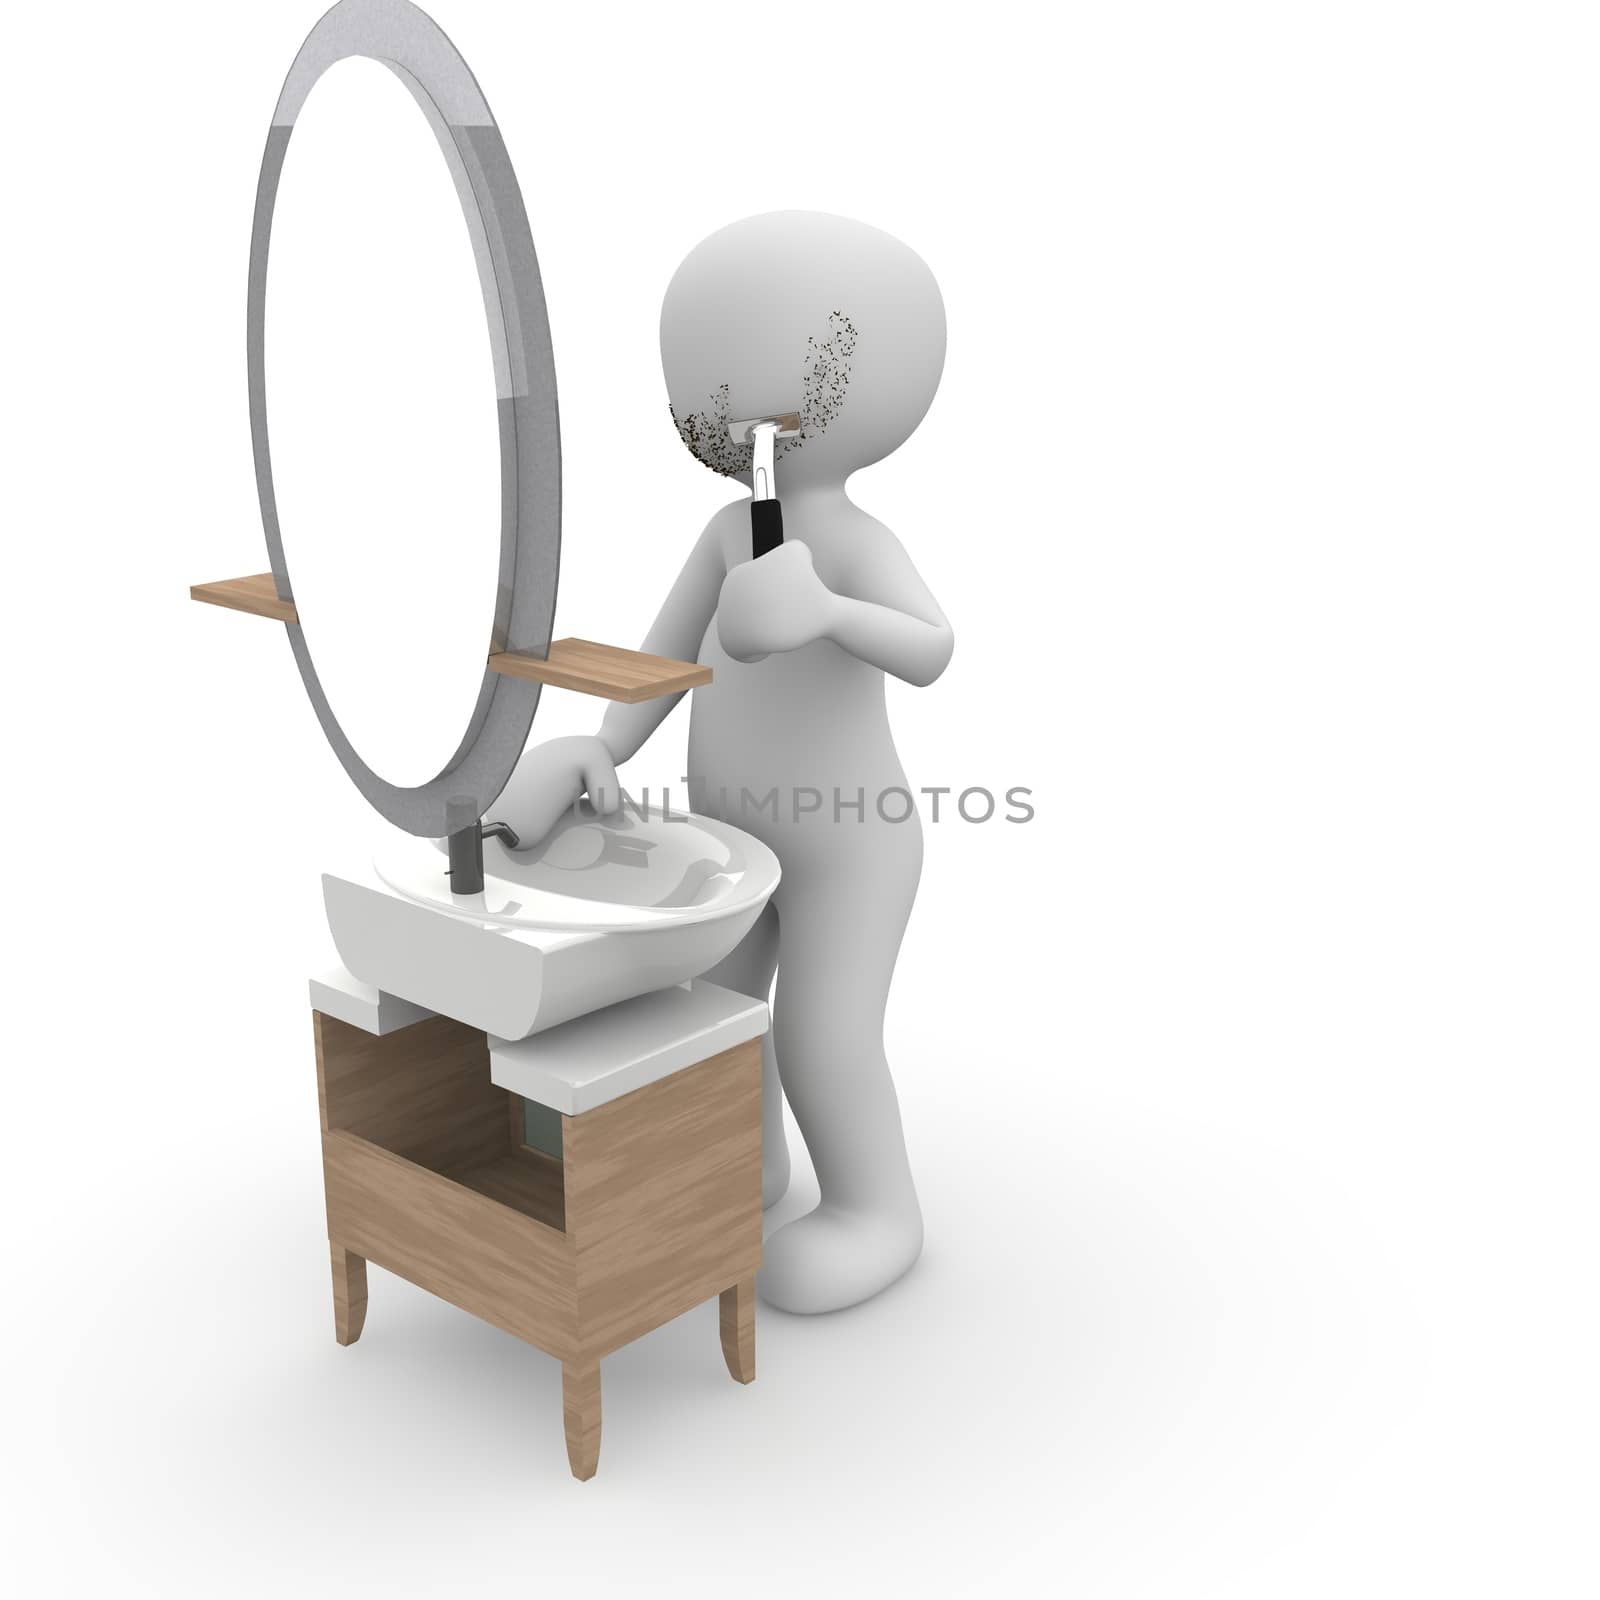 A character shaves in front of mirror.